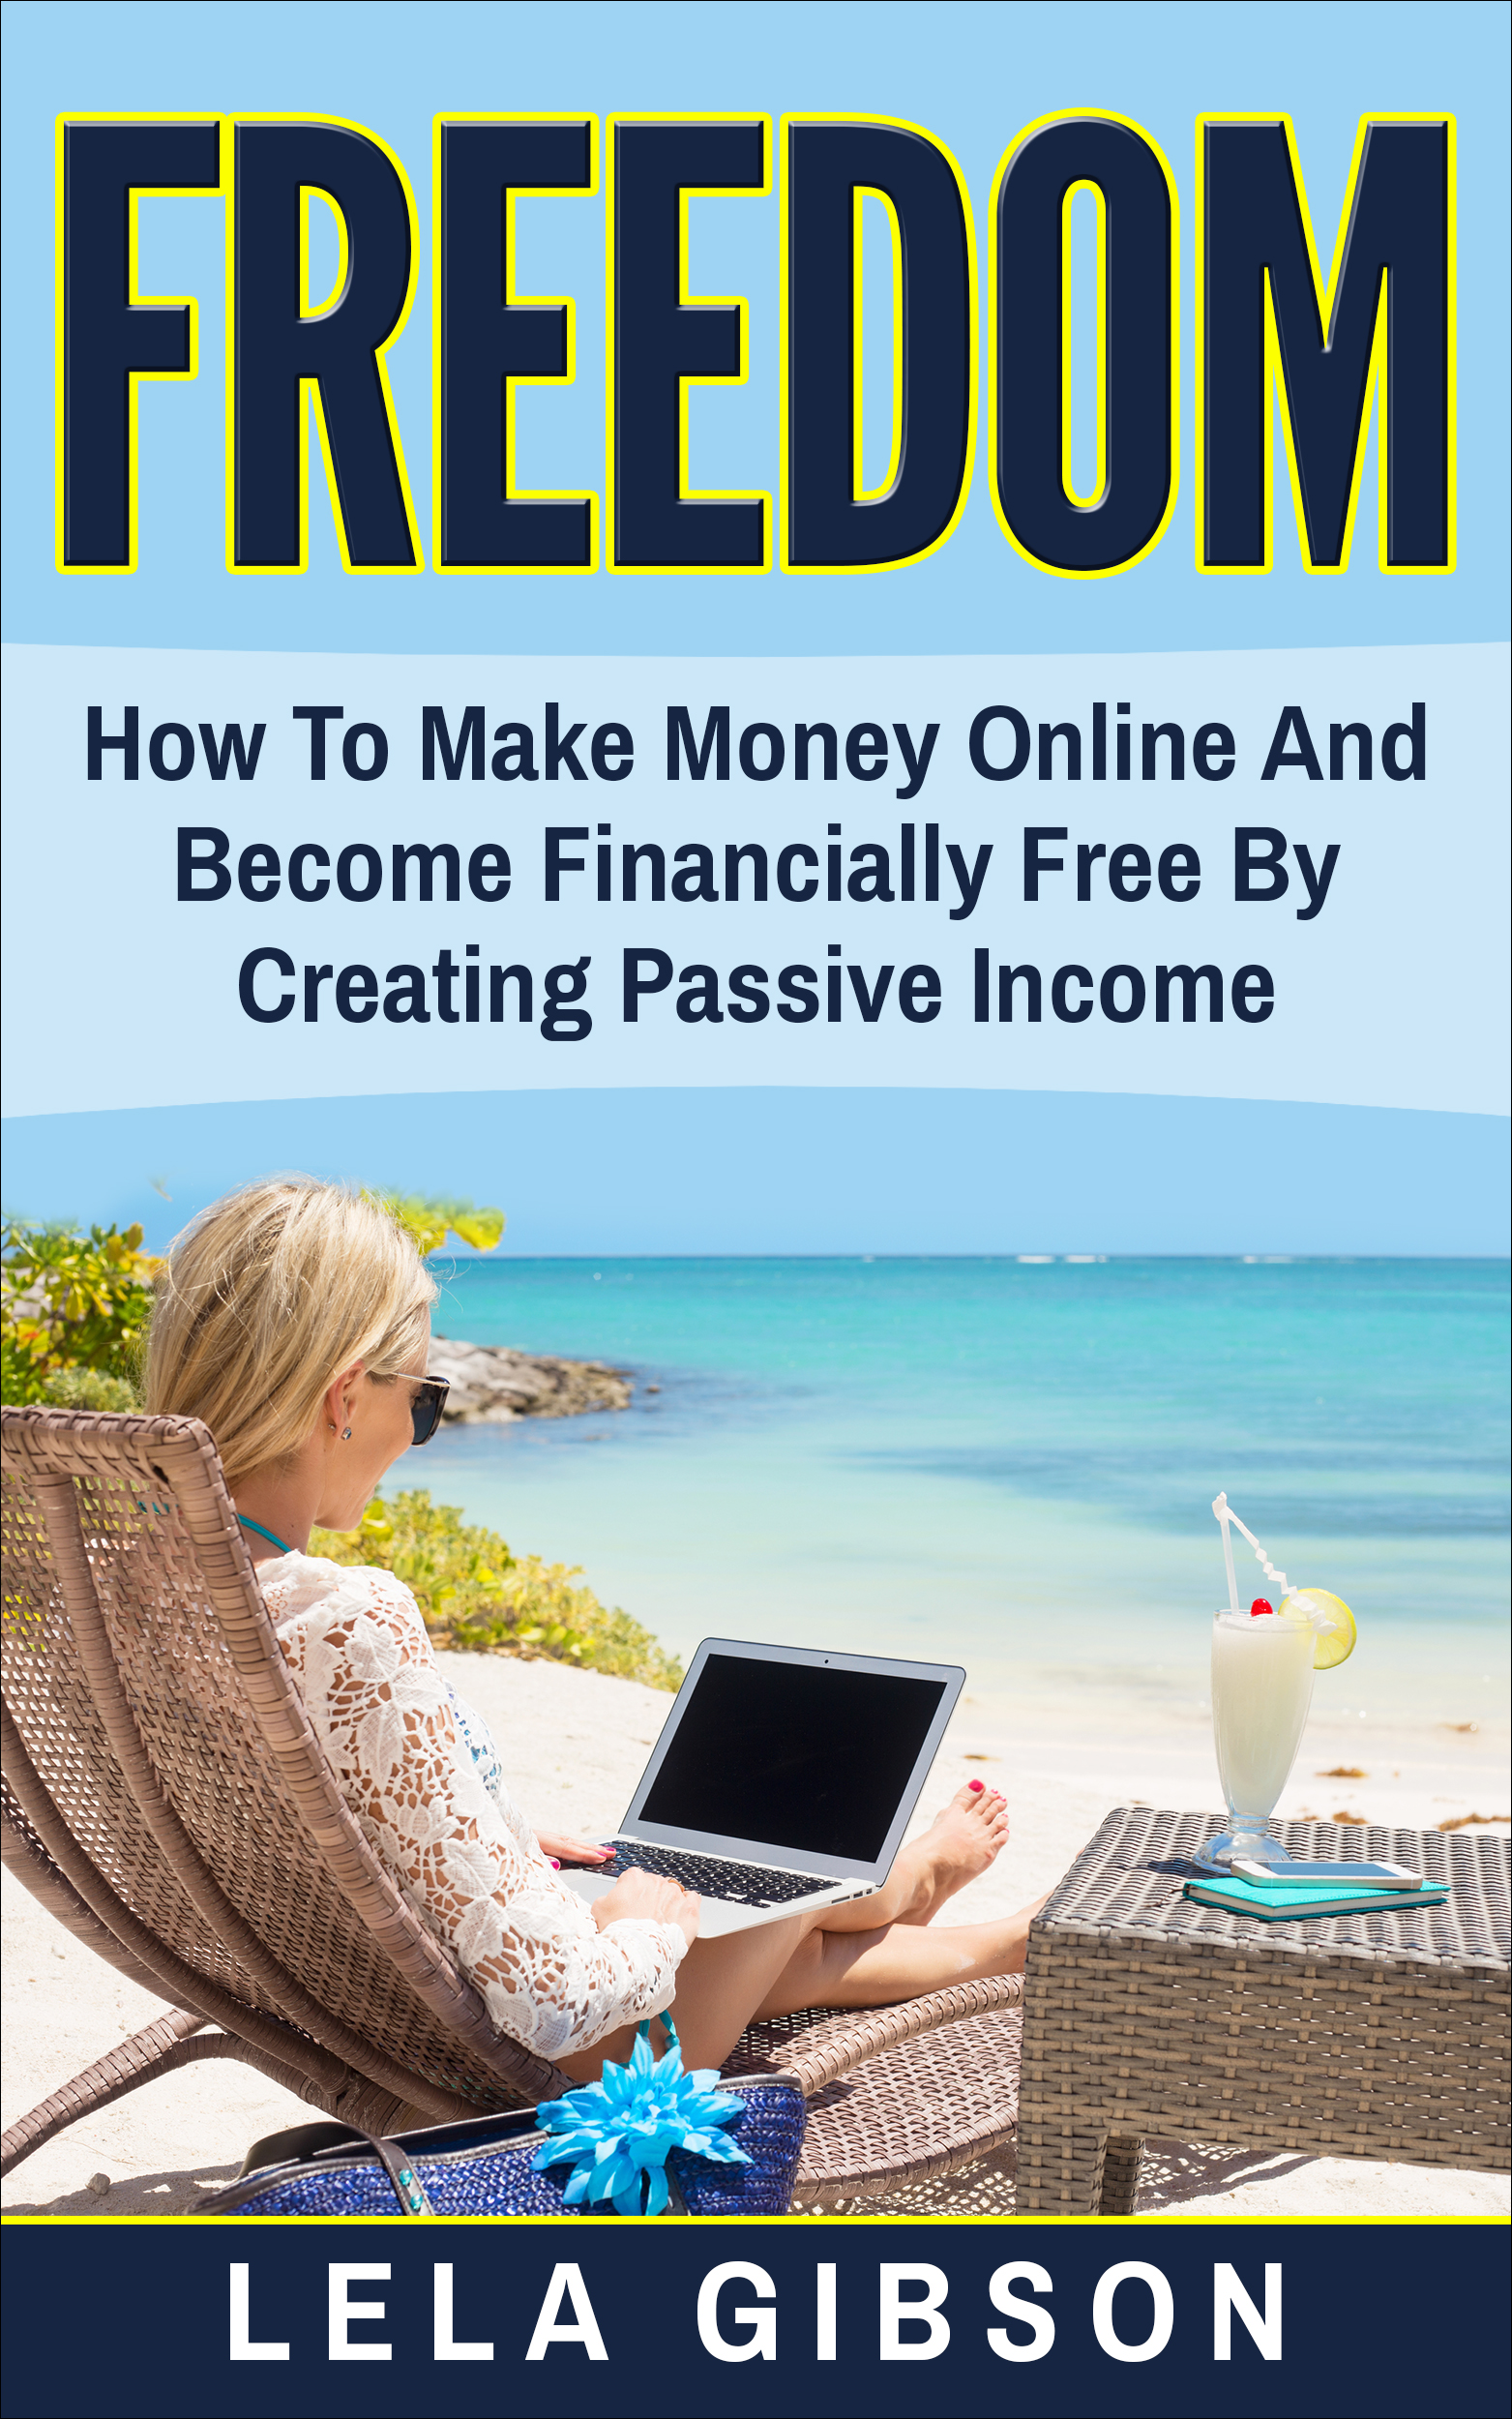 FREE: Freedom: How To Make Money Online And Become Financially Free By Creating Passive Income by Lela Gibson